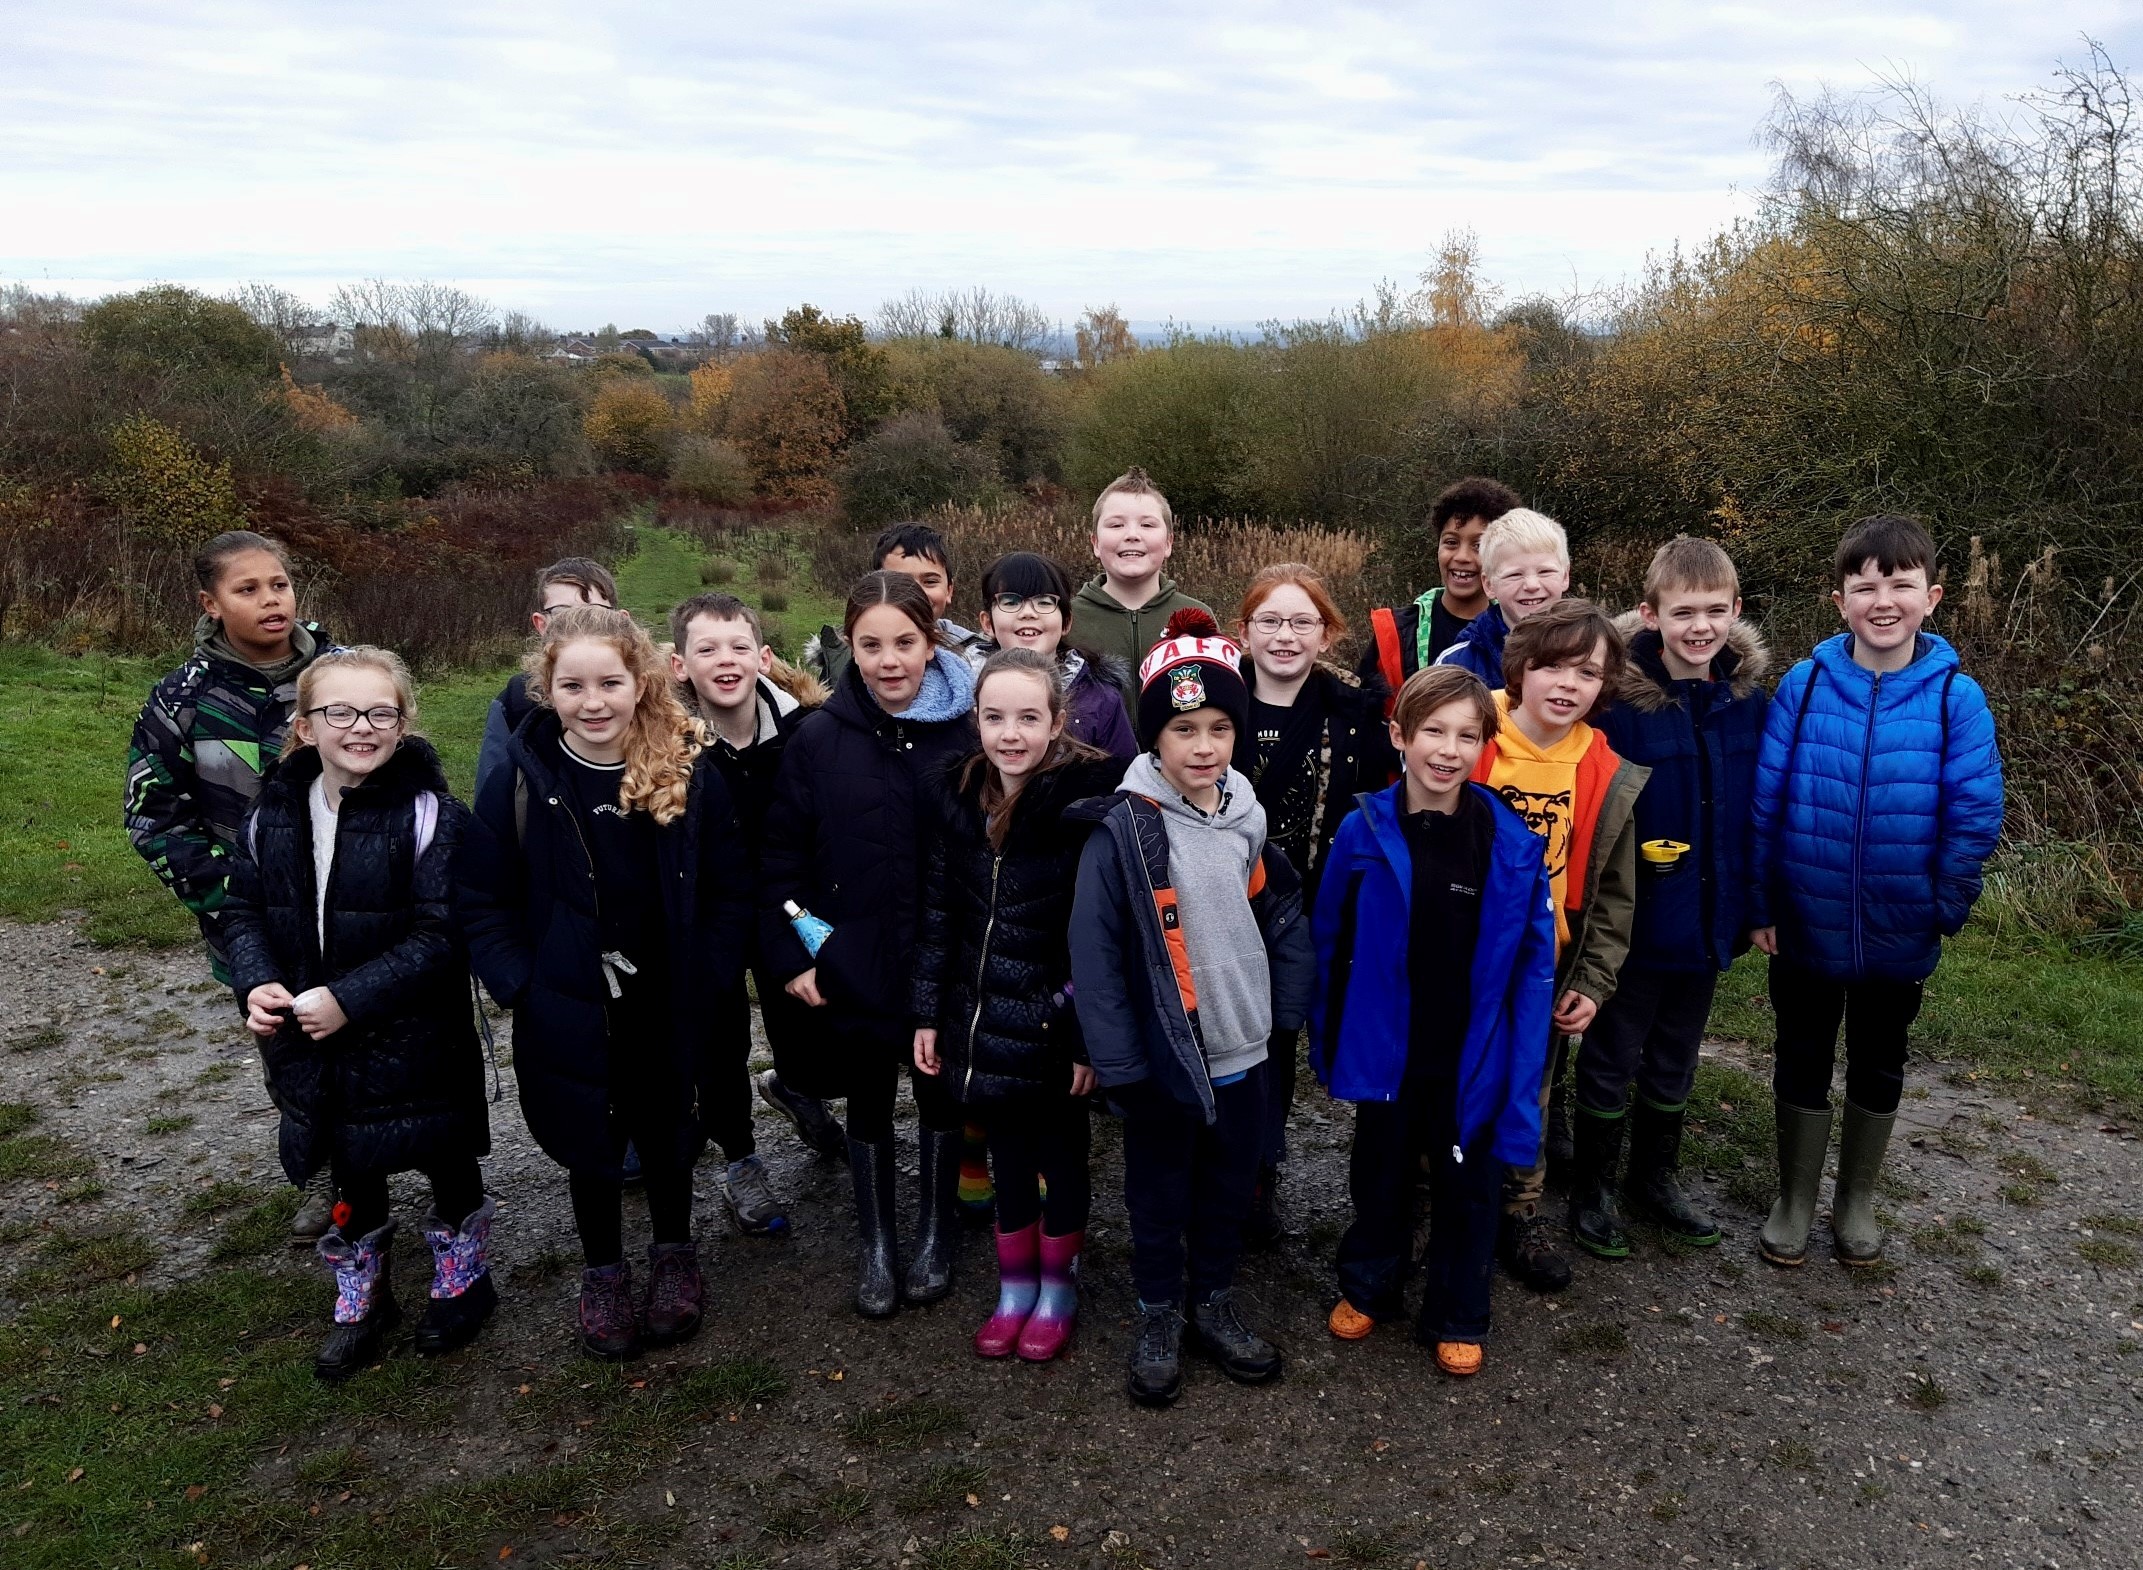 Pupils from Mountain Lane Primary School, Buckley, exploring the Buckley Heritage Trail.